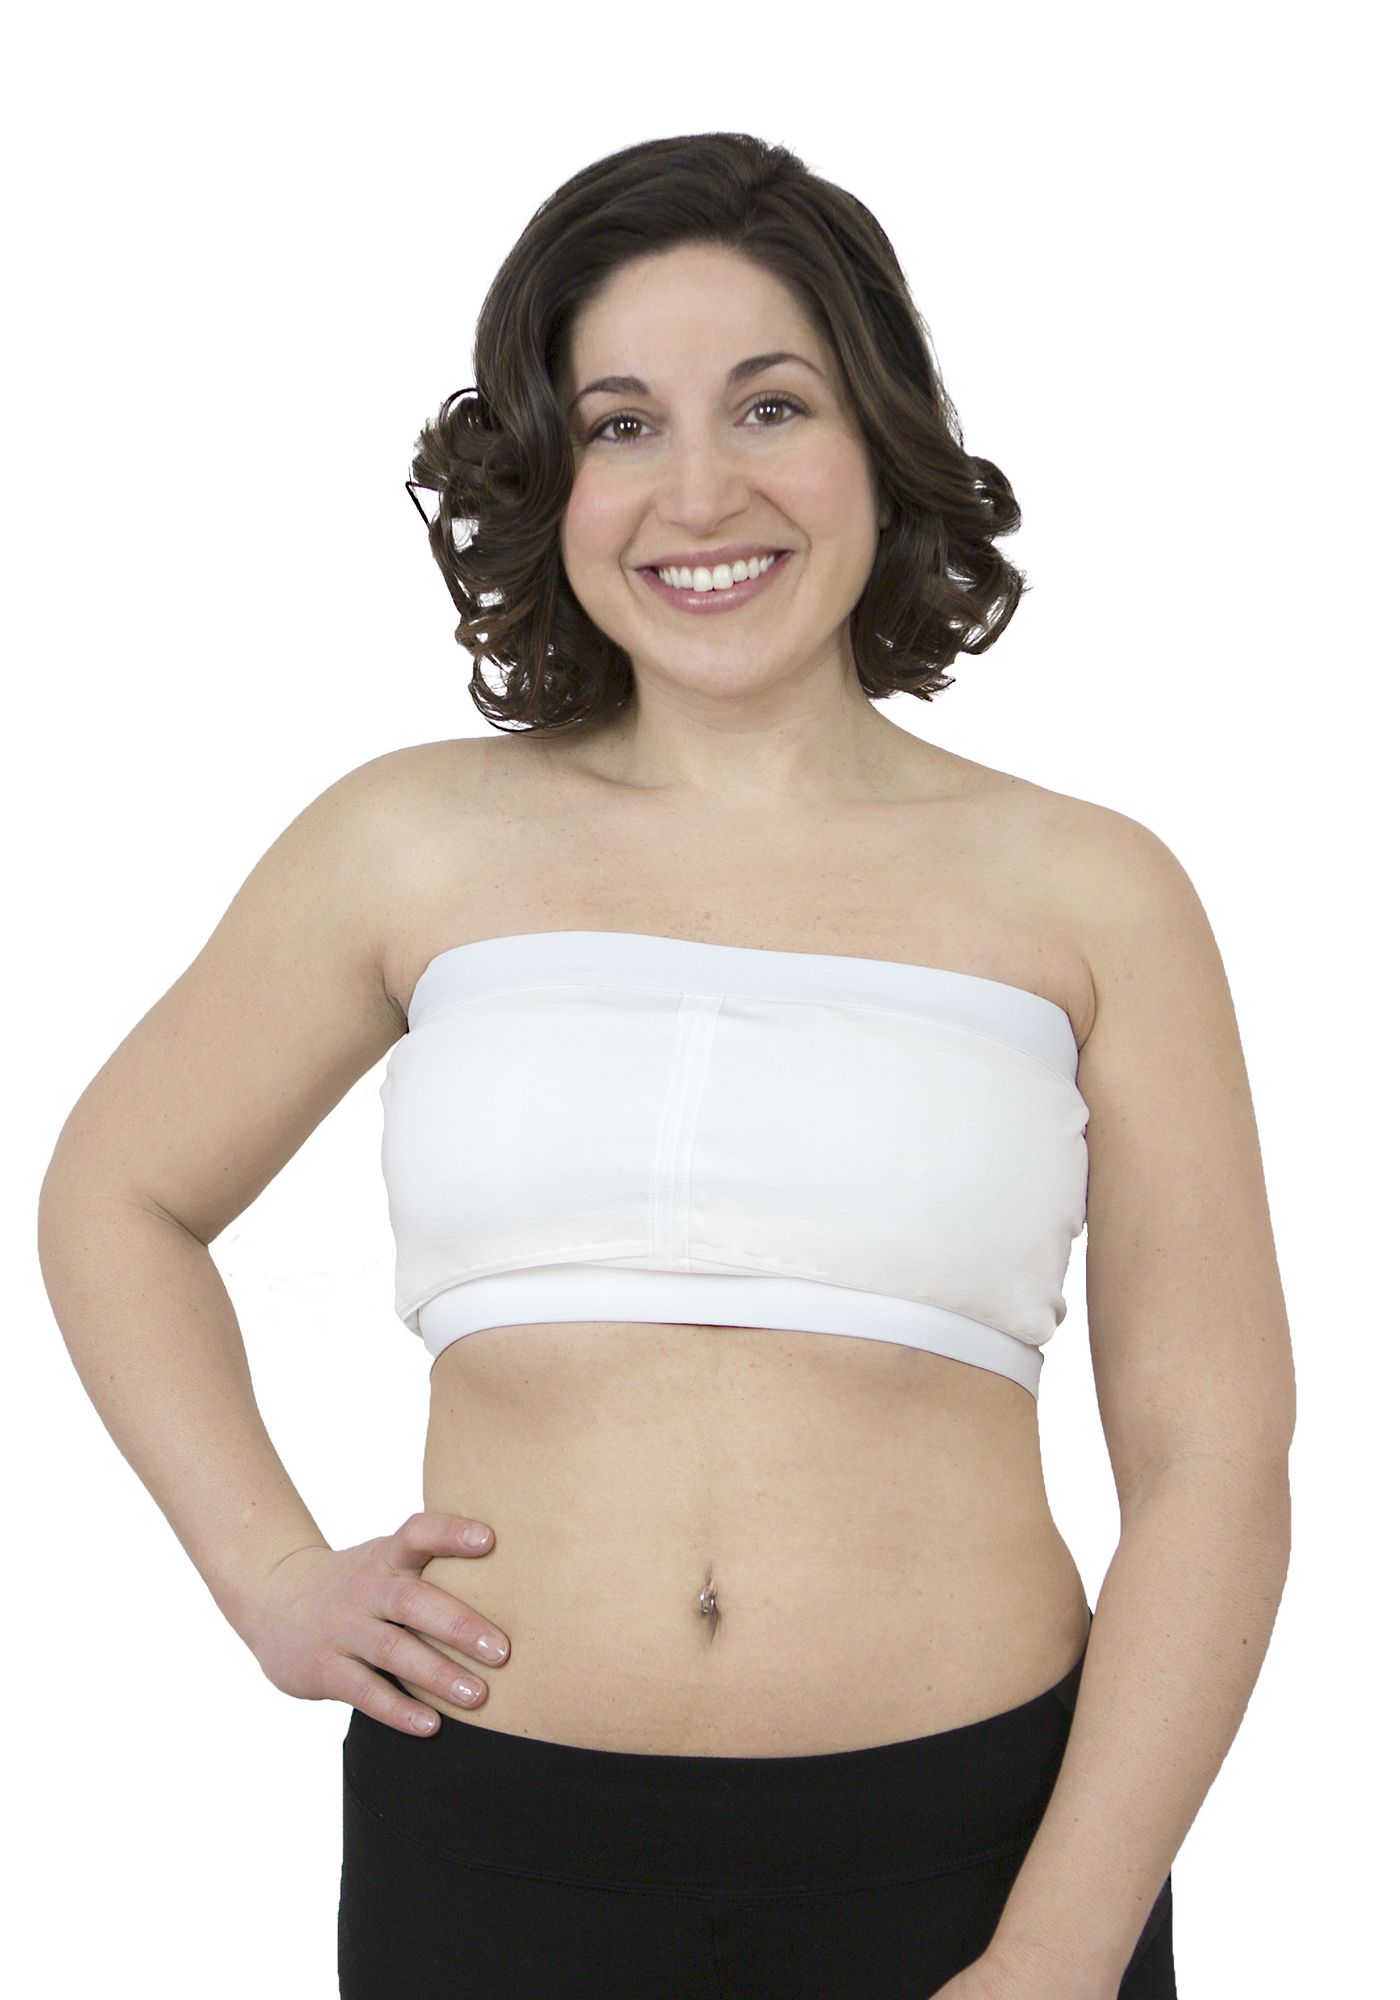 Rumina'S Pump&Nurse Relaxed All-In-One Nursing Bra For Maternity, Nursing  With Built In Hands-Free Pumping Bra 